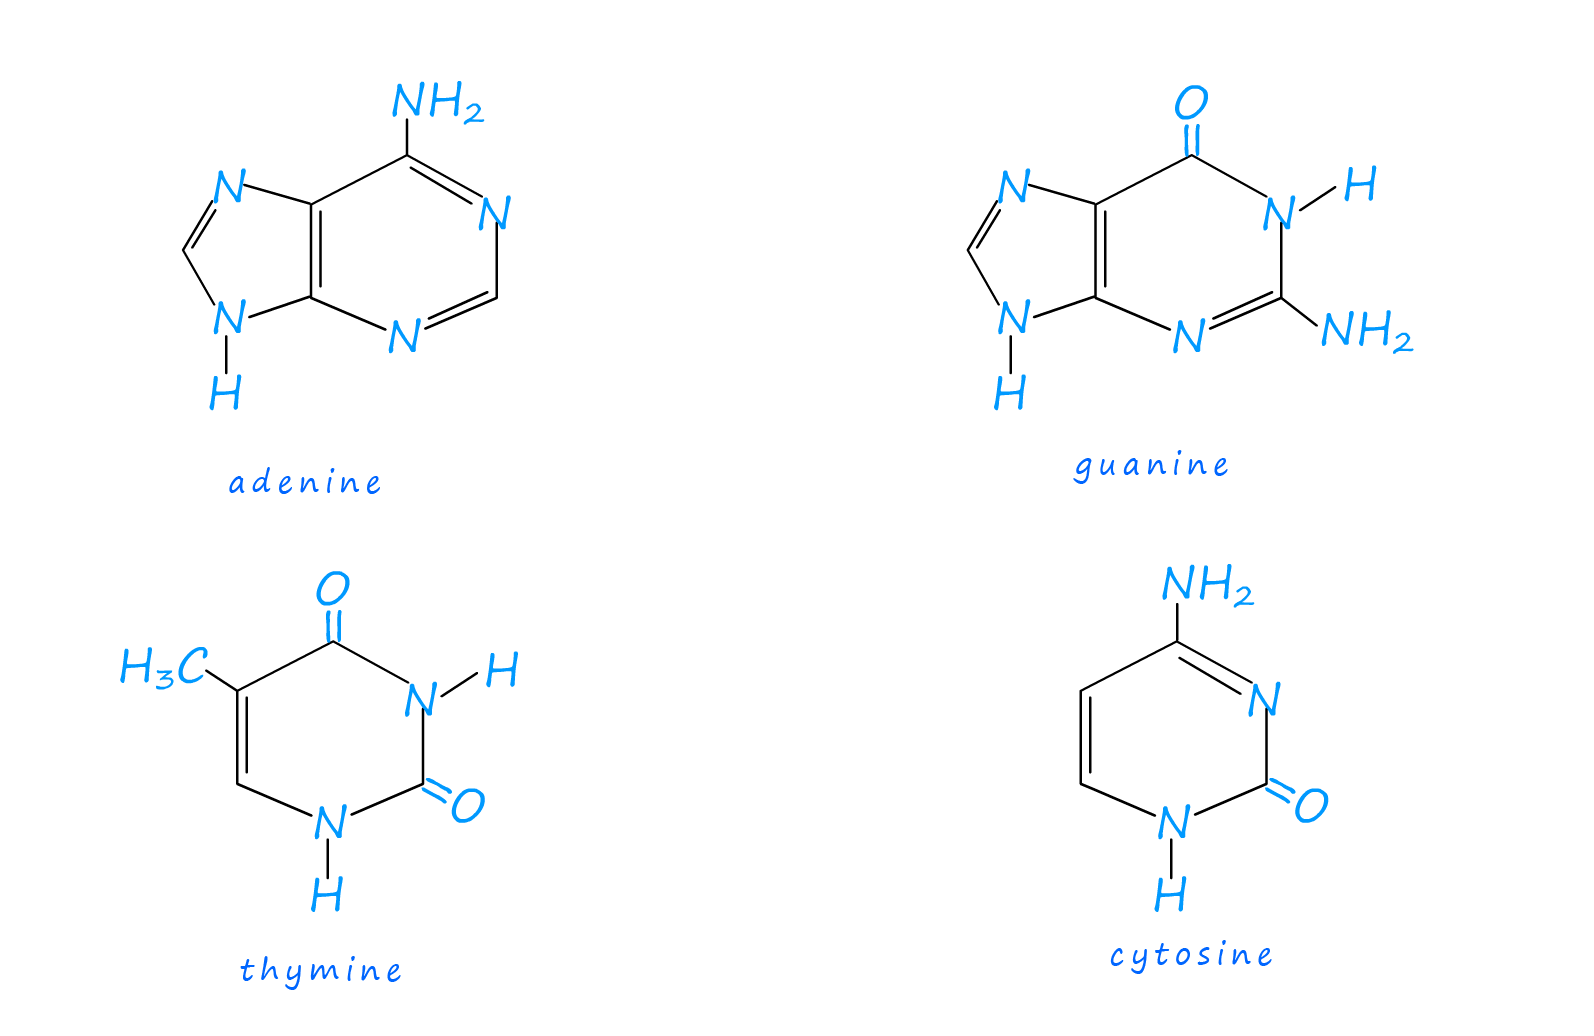 structure of the four DNA bases thymine, adenine, cytosine, guanine